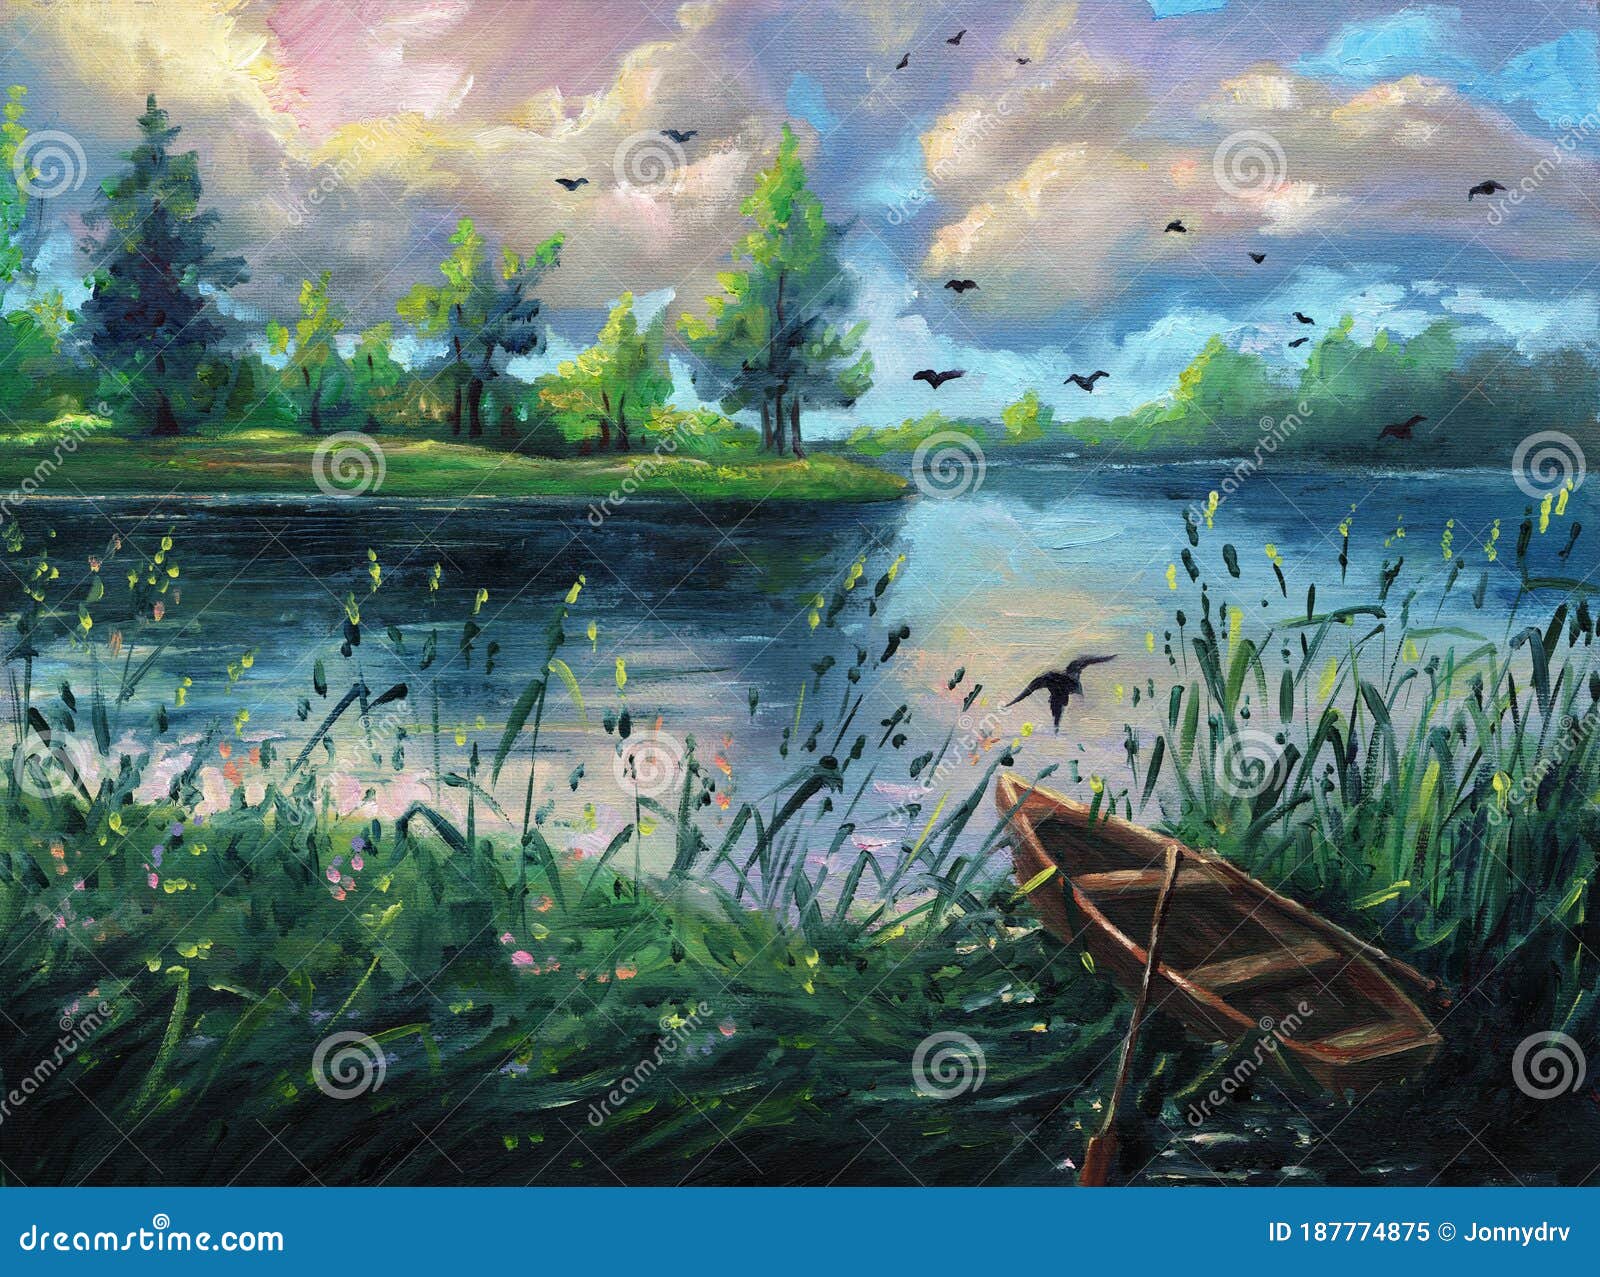 Summer Oil Painting Nature Forest Landscape Background on Canvas with Pond,  Evening Sunset, Lake, Green Trees, Clouds, Blue Sky Stock Illustration -  Illustration of impressionism, painting: 187774875